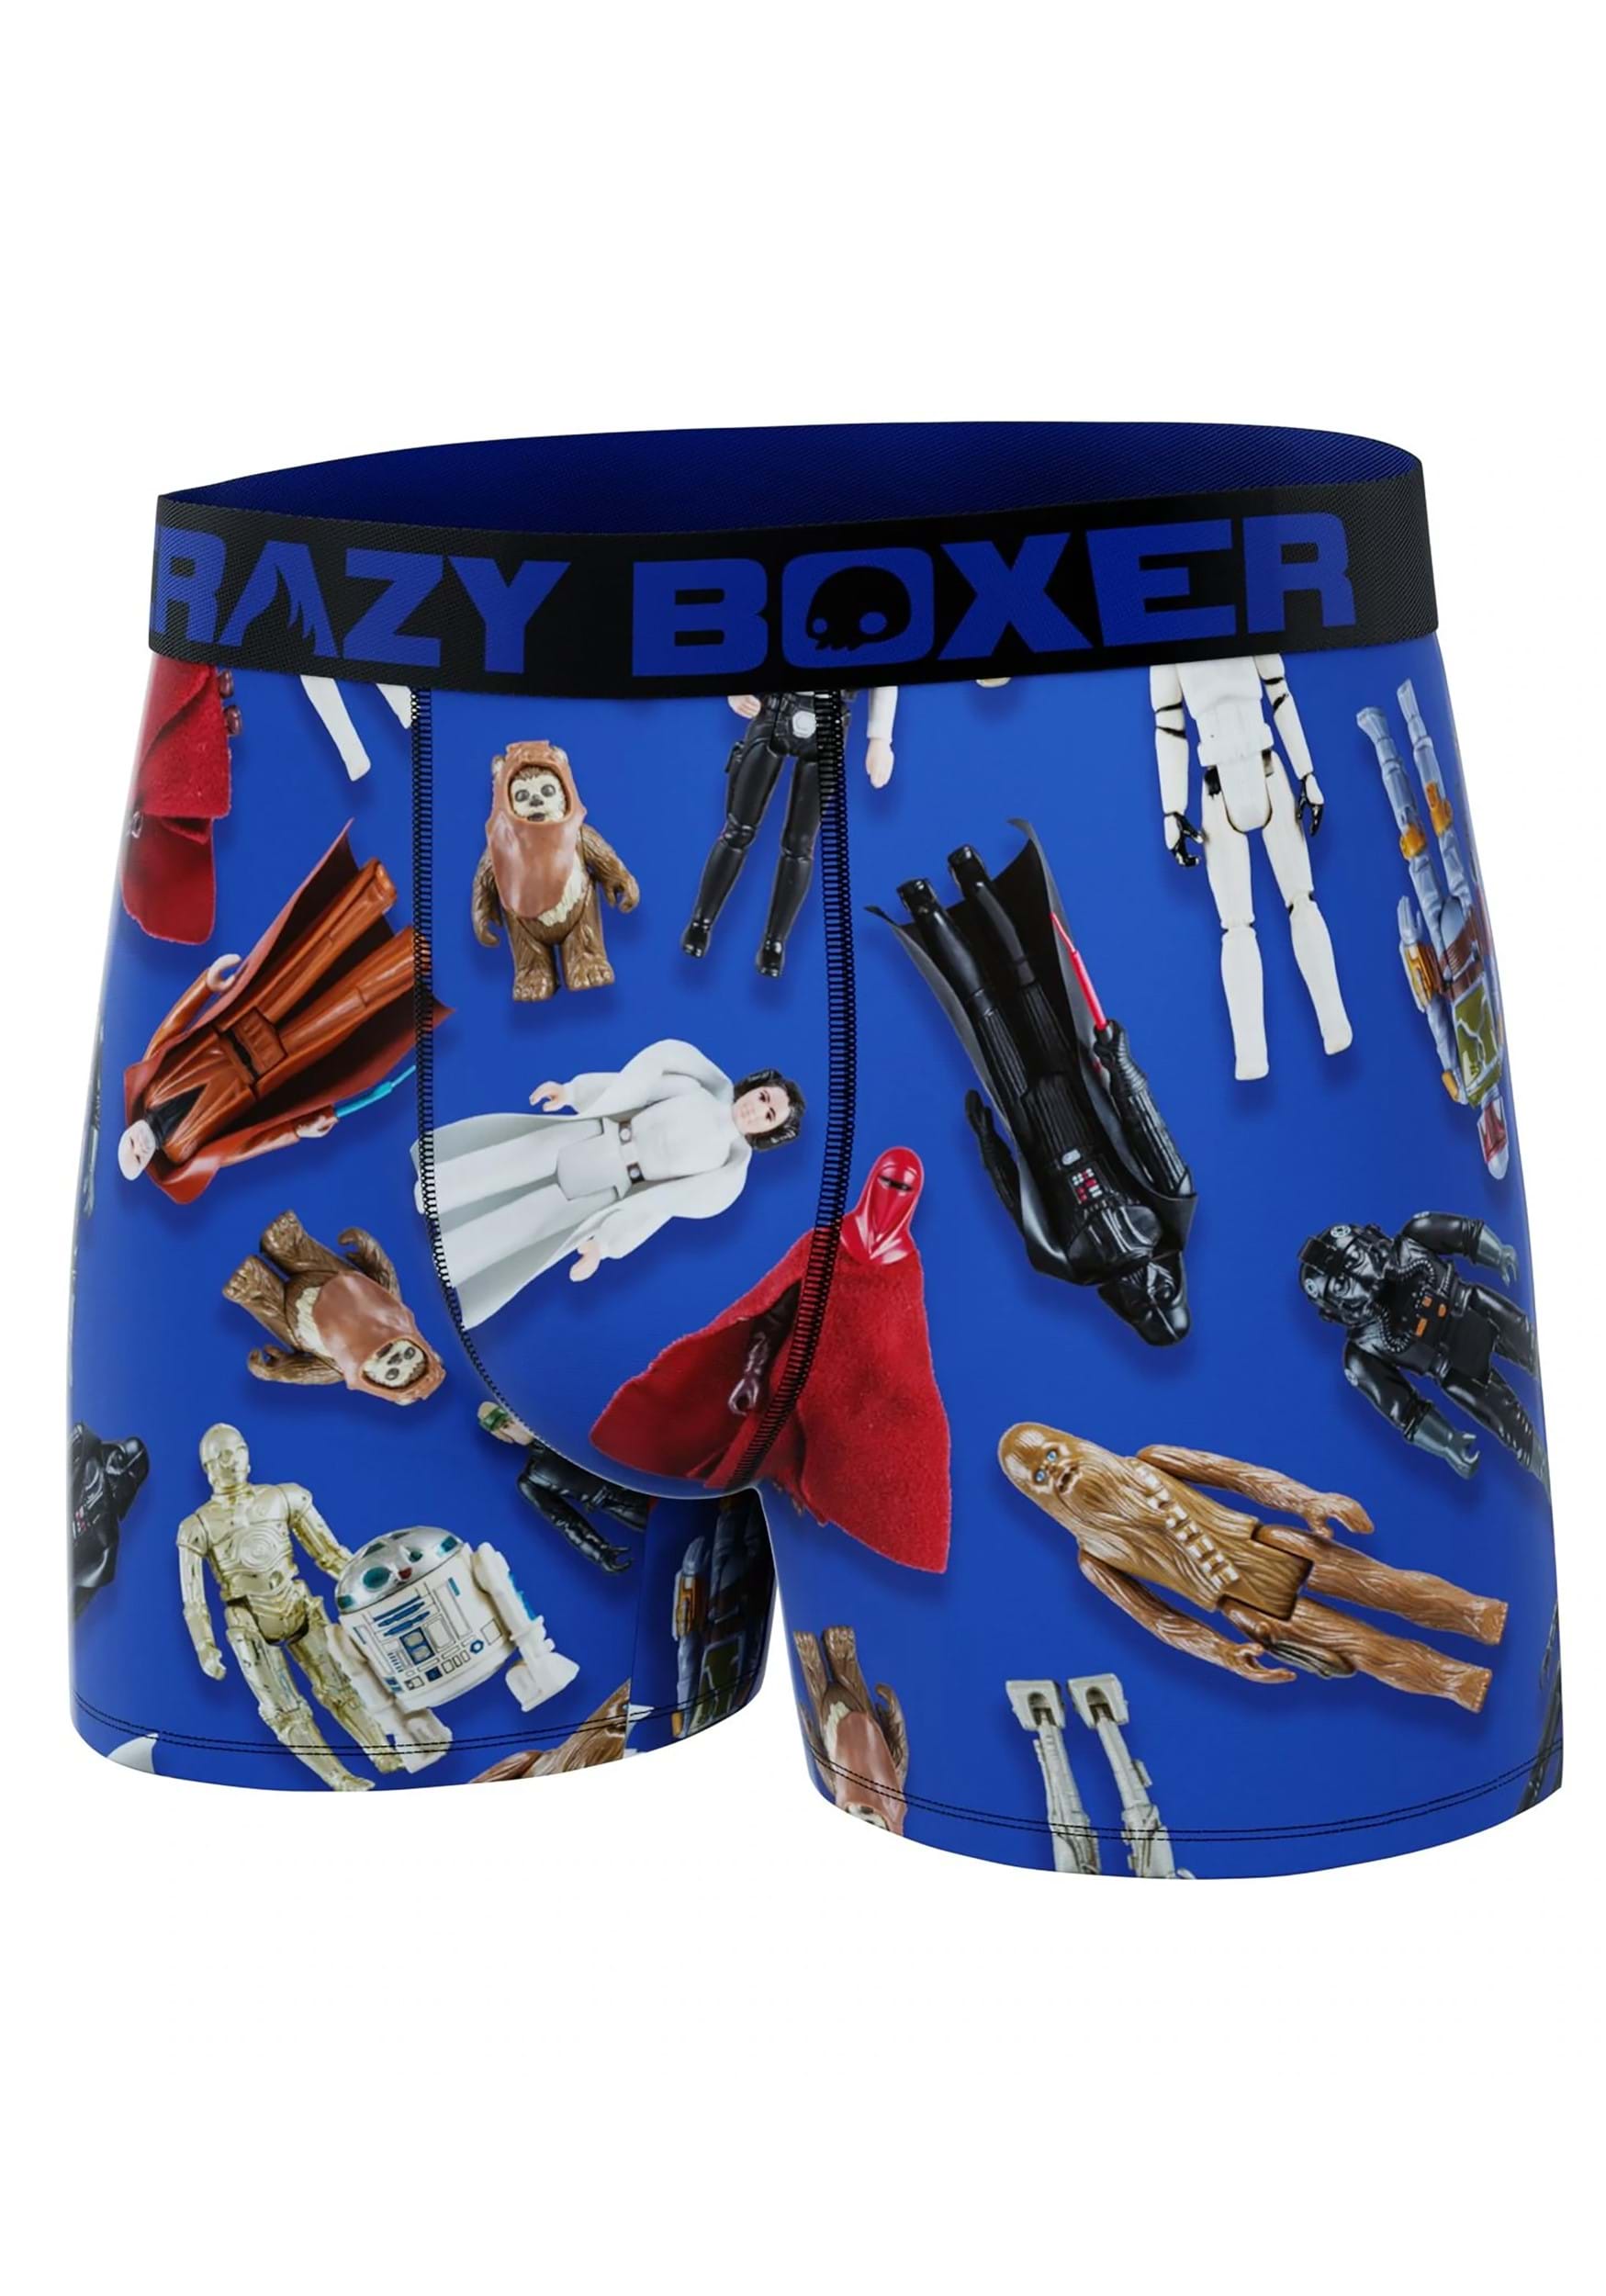 Crazy Boxers Star Wars The Child Grogu Boxer Briefs in Cereal Box Blue